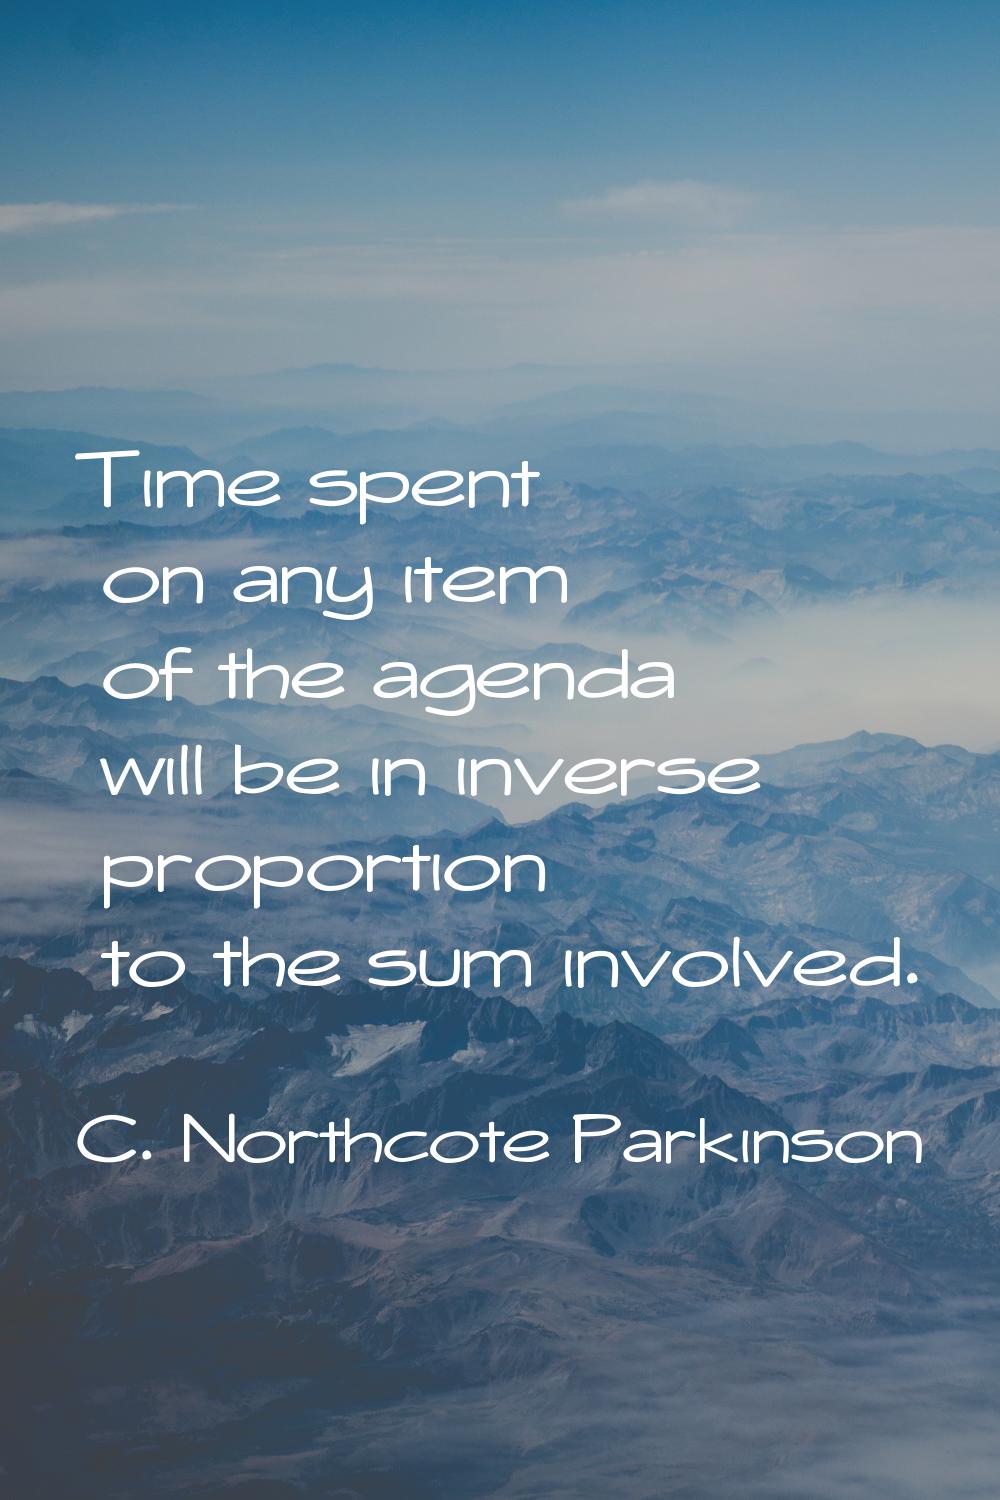 Time spent on any item of the agenda will be in inverse proportion to the sum involved.